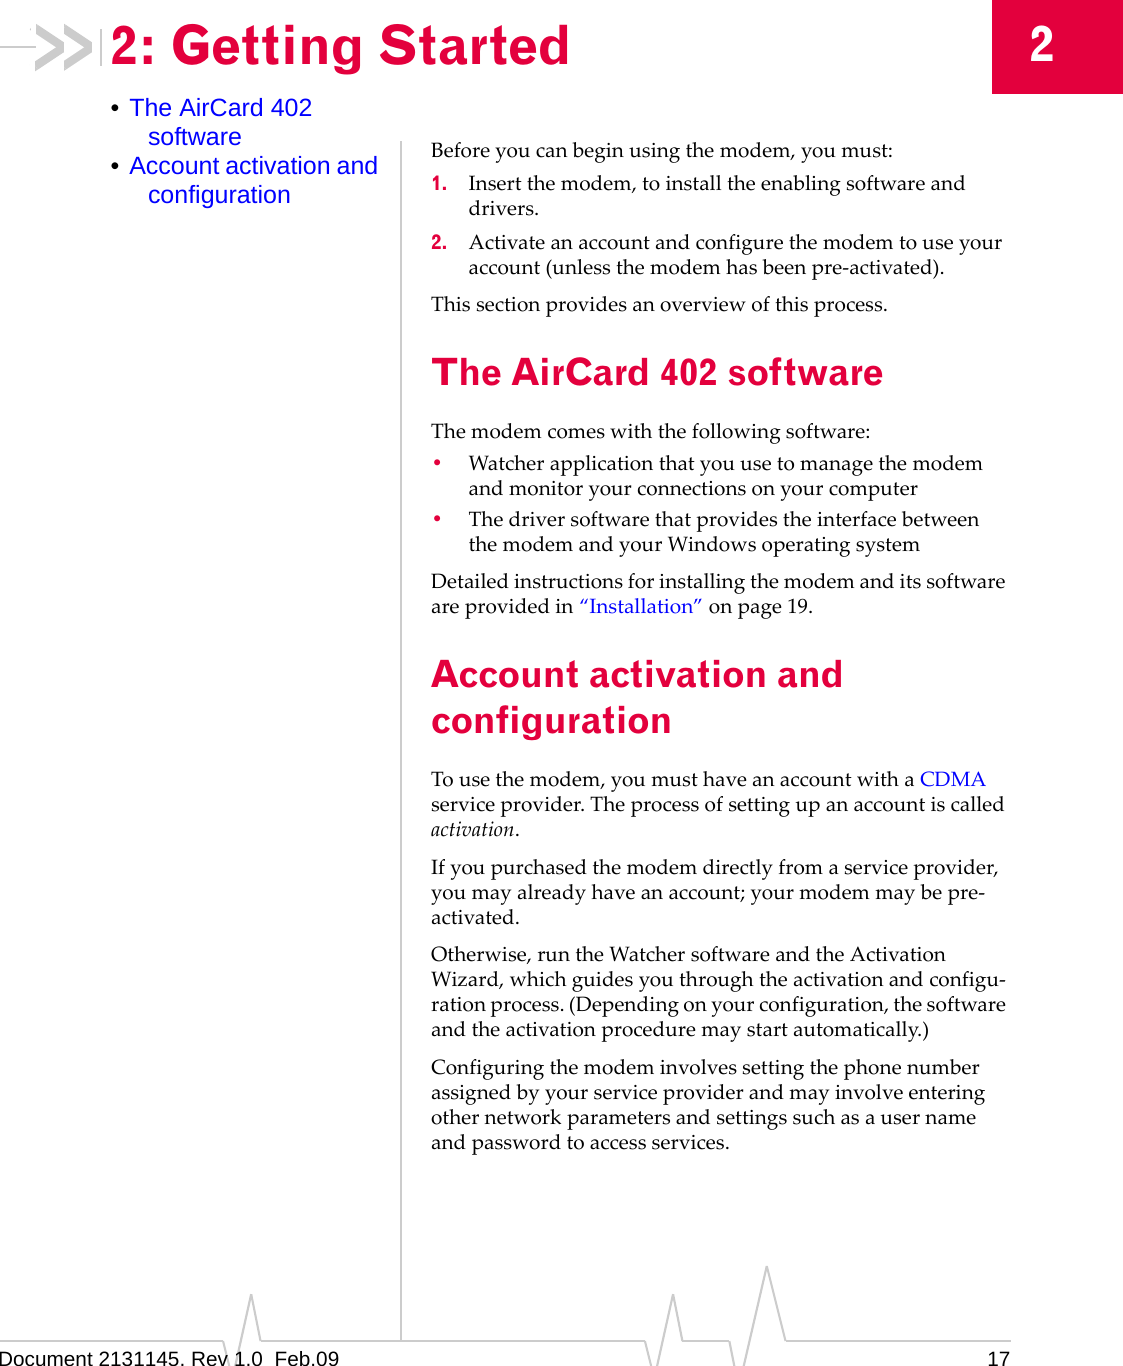 Document 2131145. Rev 1.0  Feb.09 1722: Getting Started•The AirCard 402 software•Account activation and configurationBeforeyoucanbeginusingthemodem,youmust:1. Insertthemodem,toinstalltheenablingsoftwareanddrivers.2. Activateanaccountandconfigurethemodemtouseyouraccount(unlessthemodemhasbeenpre‐activated).Thissectionprovidesanoverviewofthisprocess.The AirCard 402 softwareThemodemcomeswiththefollowingsoftware:•Watcherapplicationthatyouusetomanagethemodemandmonitoryourconnectionsonyourcomputer•ThedriversoftwarethatprovidestheinterfacebetweenthemodemandyourWindowsoperatingsystemDetailedinstructionsforinstallingthemodemanditssoftwareareprovidedin“Installation”onpage 19.Account activation and configurationTousethemodem,youmusthaveanaccountwithaCDMAserviceprovider.Theprocessofsettingupanaccountiscalledactivation.Ifyoupurchasedthemodemdirectlyfromaserviceprovider,youmayalreadyhaveanaccount;yourmodemmaybepre‐activated.Otherwise,runtheWatchersoftwareandtheActivationWizard,whichguidesyouthroughtheactivationandconfigu‐rationprocess.(Dependingonyourconfiguration,thesoftwareandtheactivationproceduremaystartautomatically.)Configuringthemodeminvolvessettingthephonenumberassignedbyyourserviceproviderandmayinvolveenteringothernetworkparametersandsettingssuchasausernameandpasswordtoaccessservices.